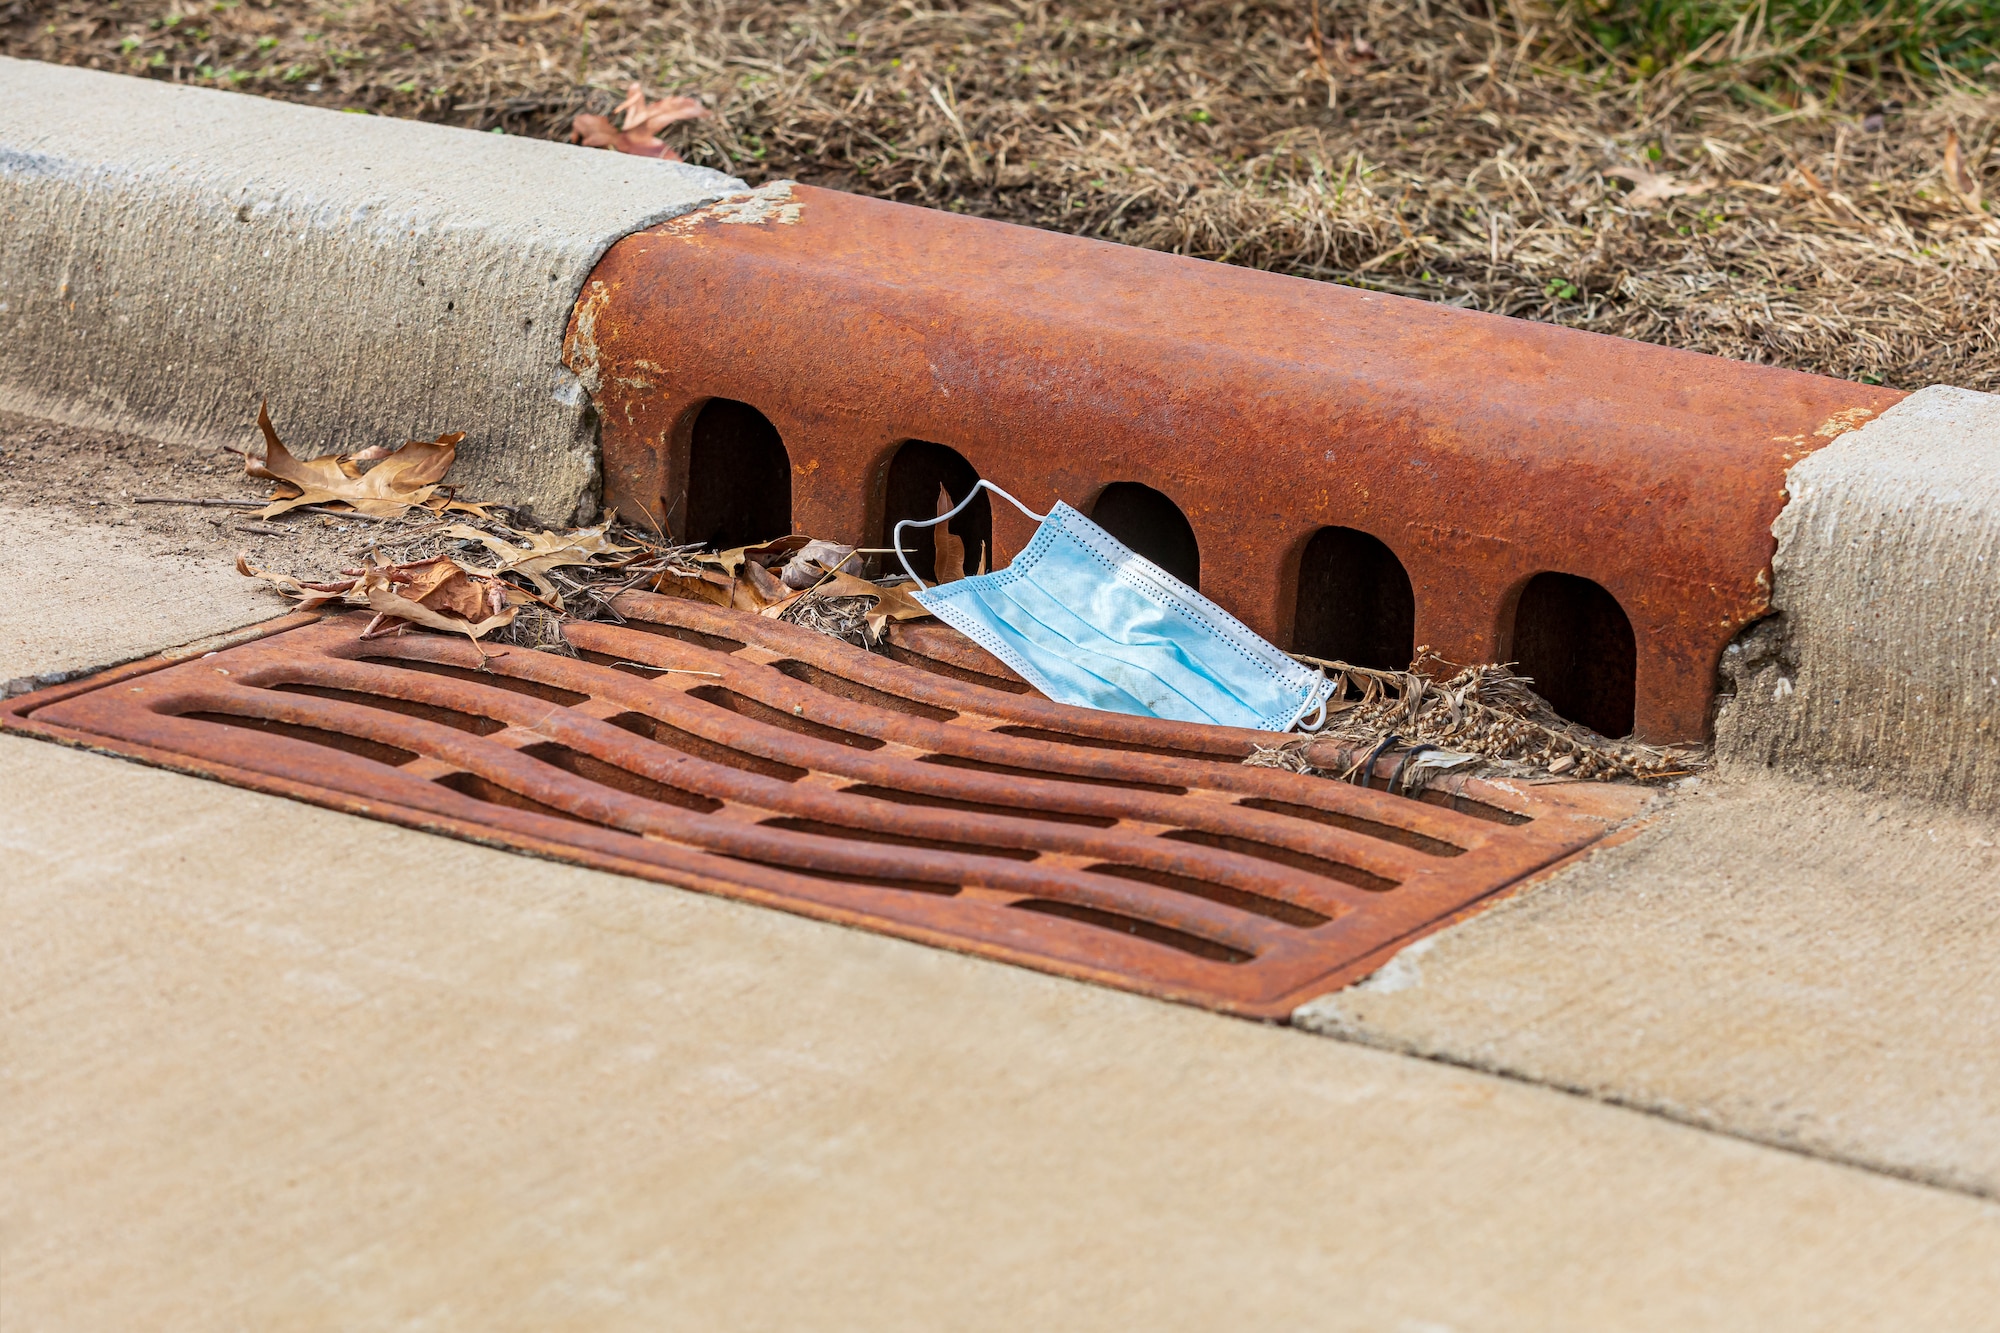 Photo shows a stormwater drain with a mask caught in the grate.